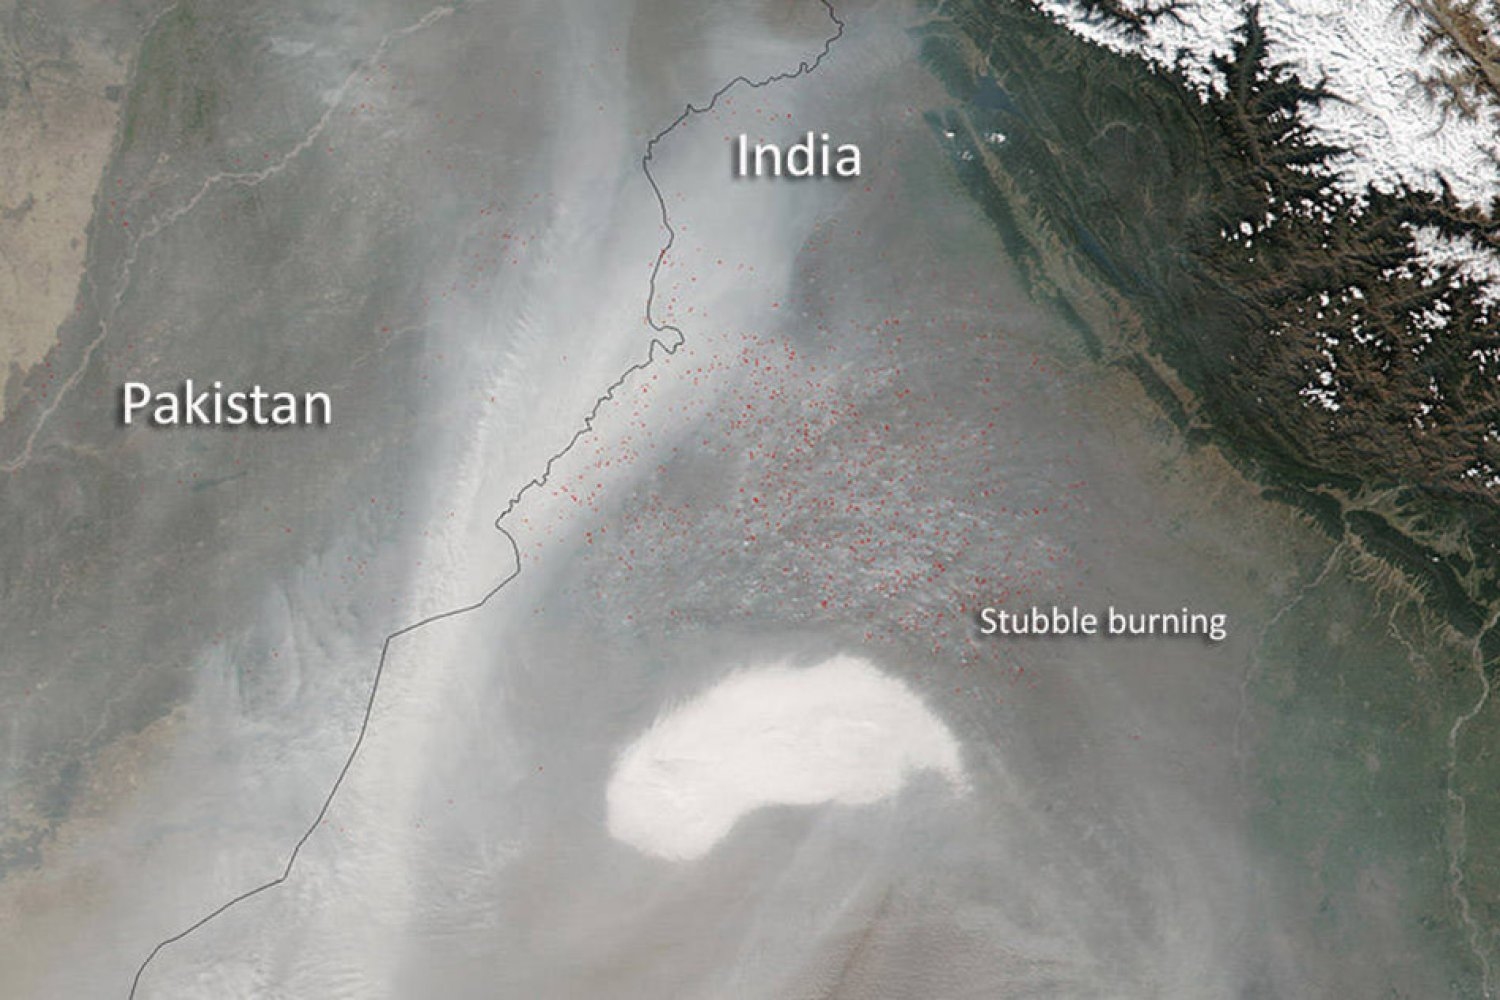 A targeted approach to reducing the health impacts of crop residue burning in India